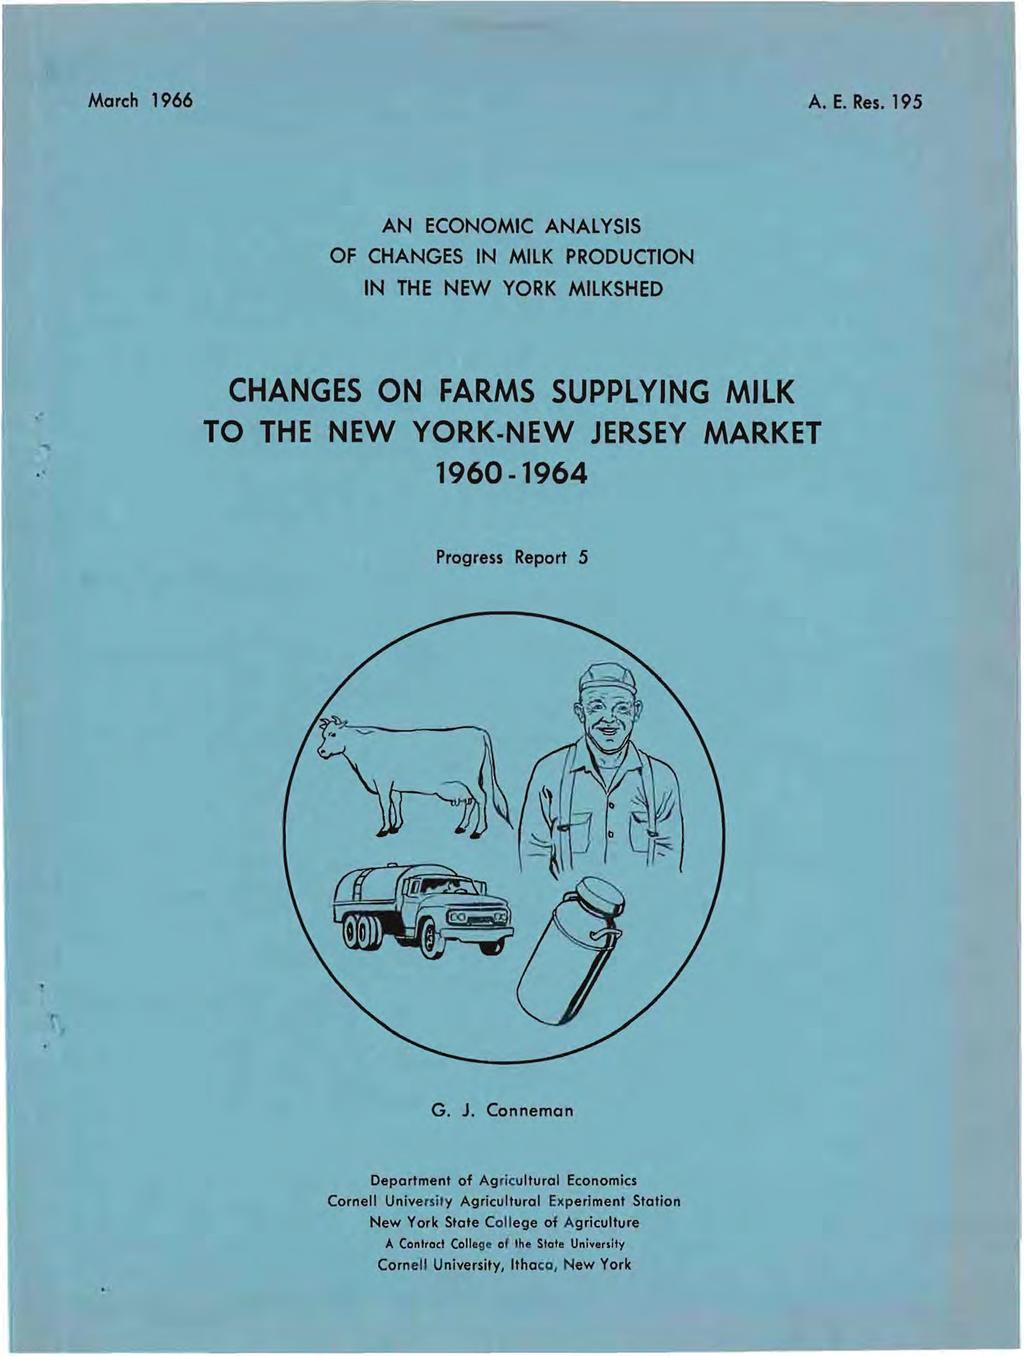 March 1966 A. E. Res. 195 AN ECONOMIC ANALYSIS OF CHANGES IN MILK PRODUCTION IN THE NEW YORK MILKSHED. CHANGES ON FARMS SUPPLYING MILK TO THE NEW YORK-NEW JERSEY MARKET 1960-1964 Progress Report 5 G.